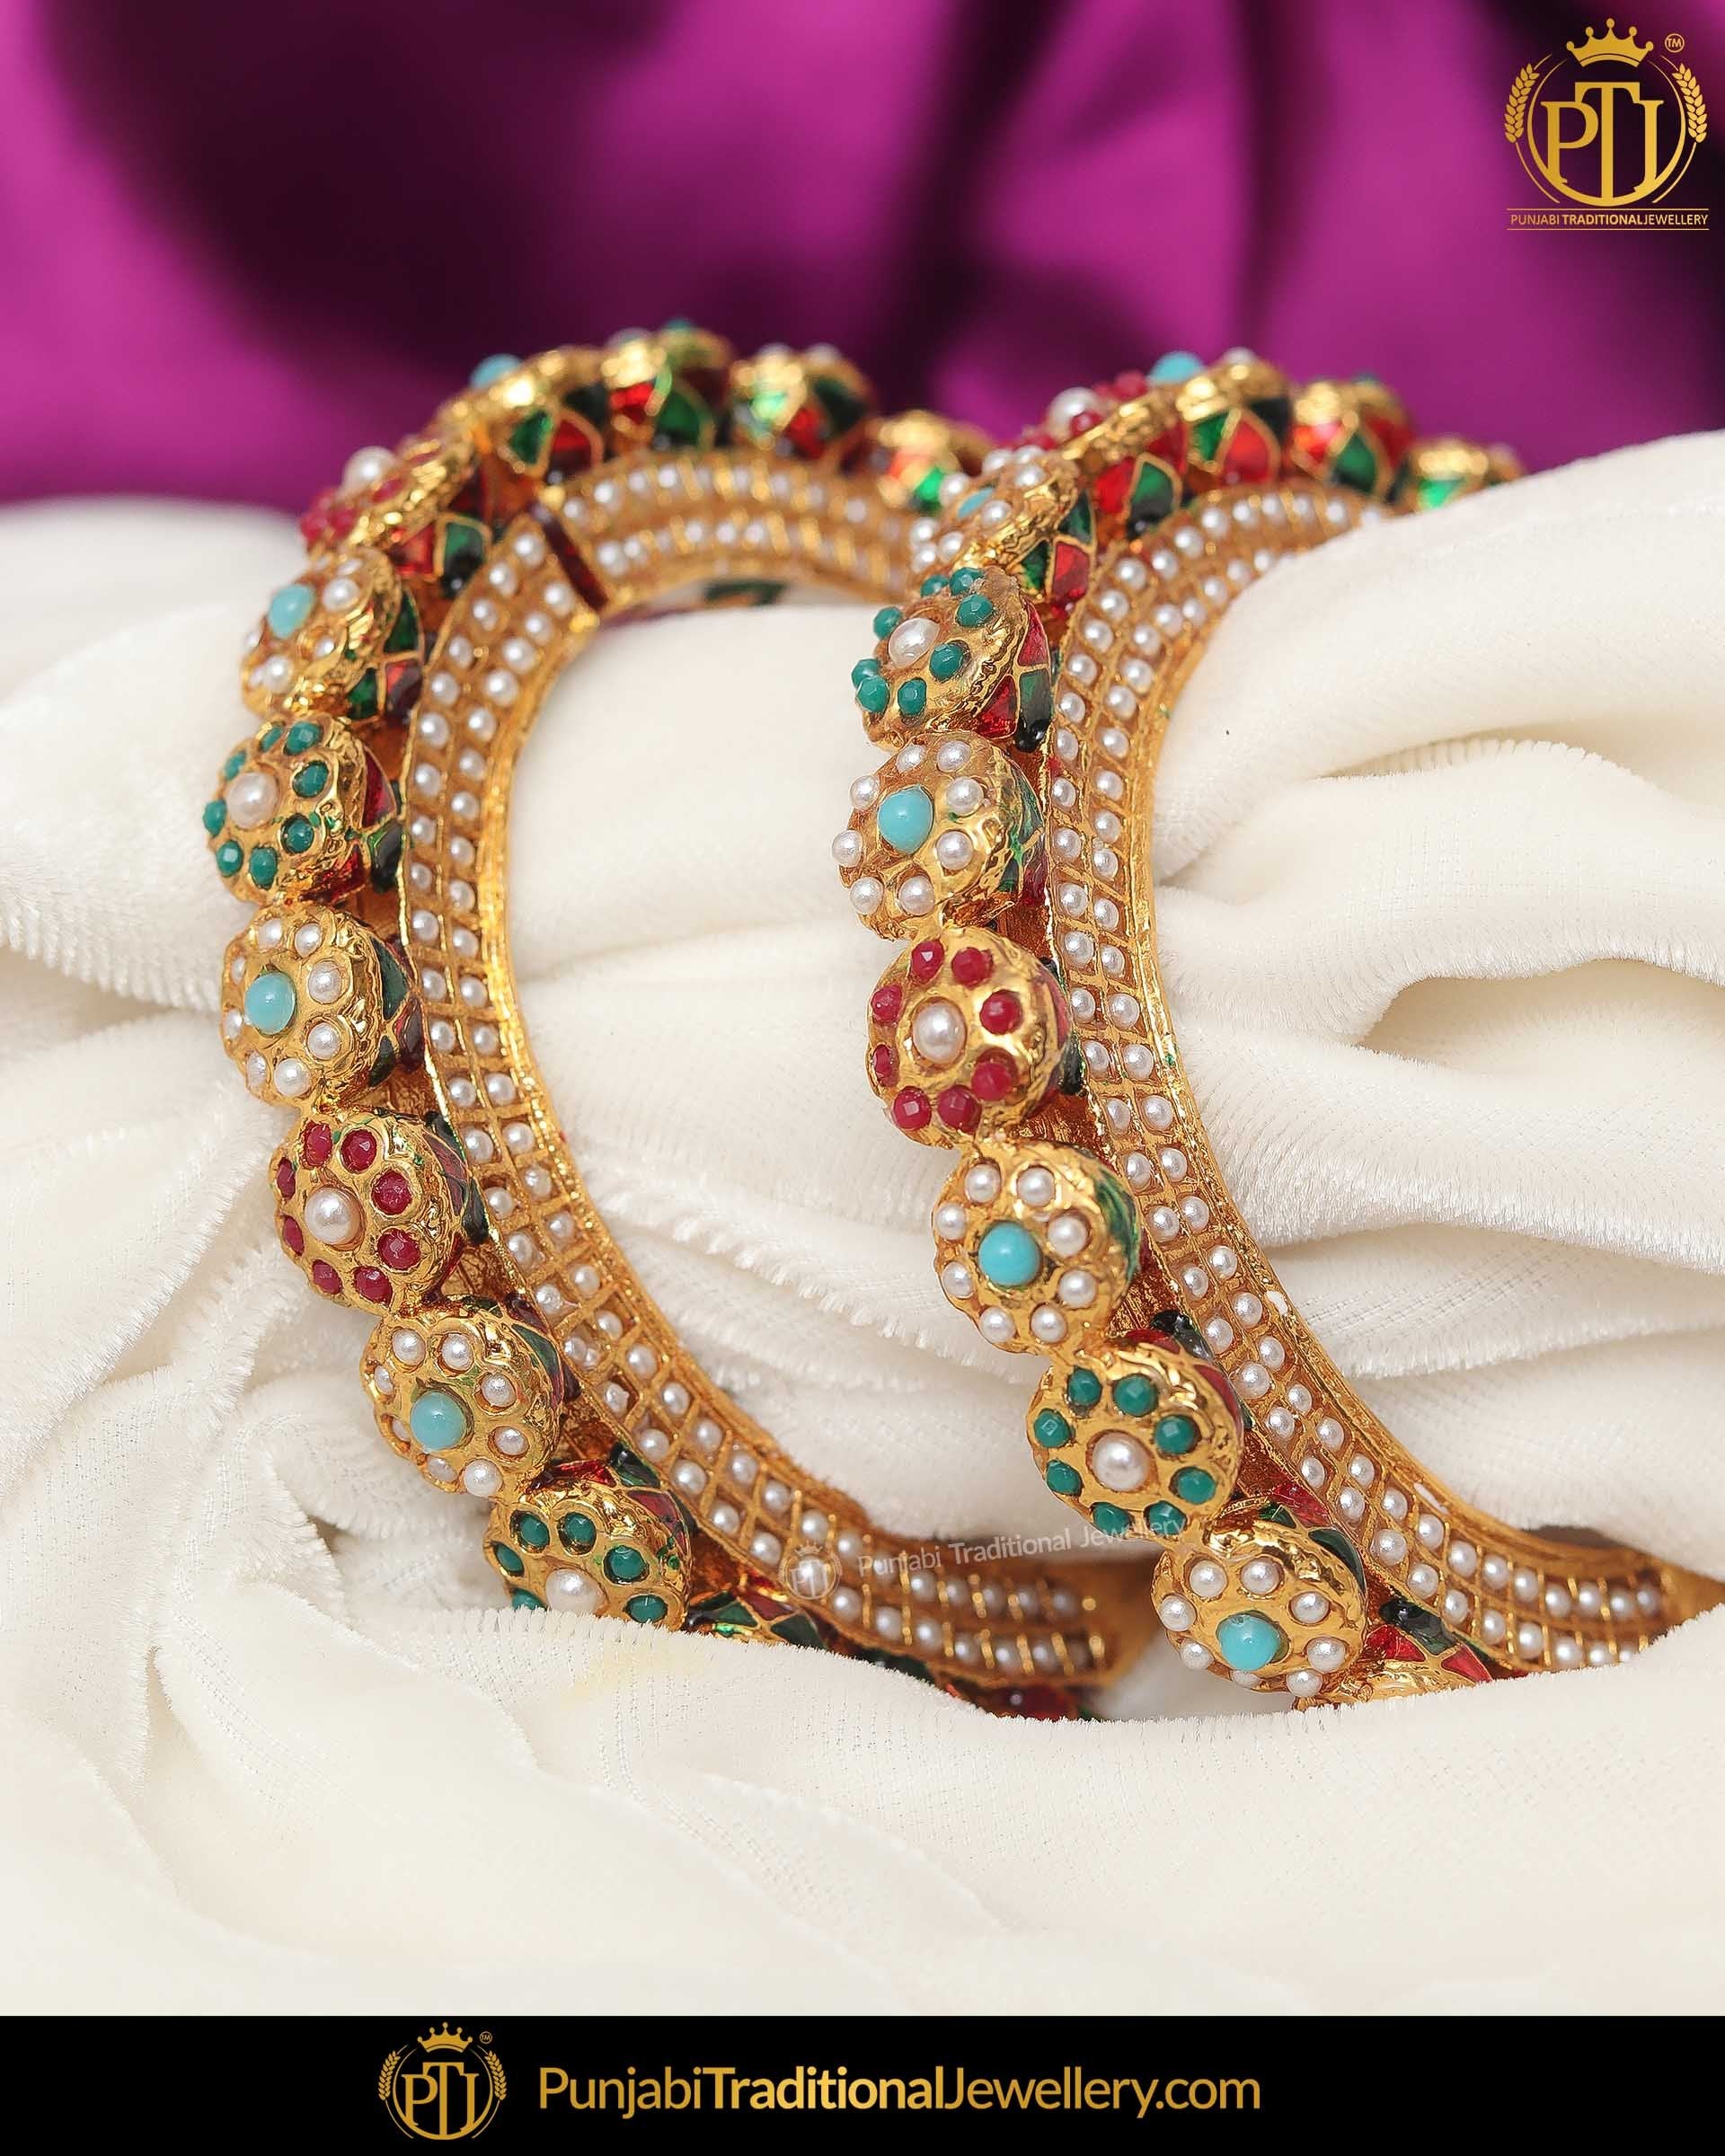 Gold Finished Multi Pearl Karra Bangles (Pair)| Punjabi Traditional Jewellery Exclusive